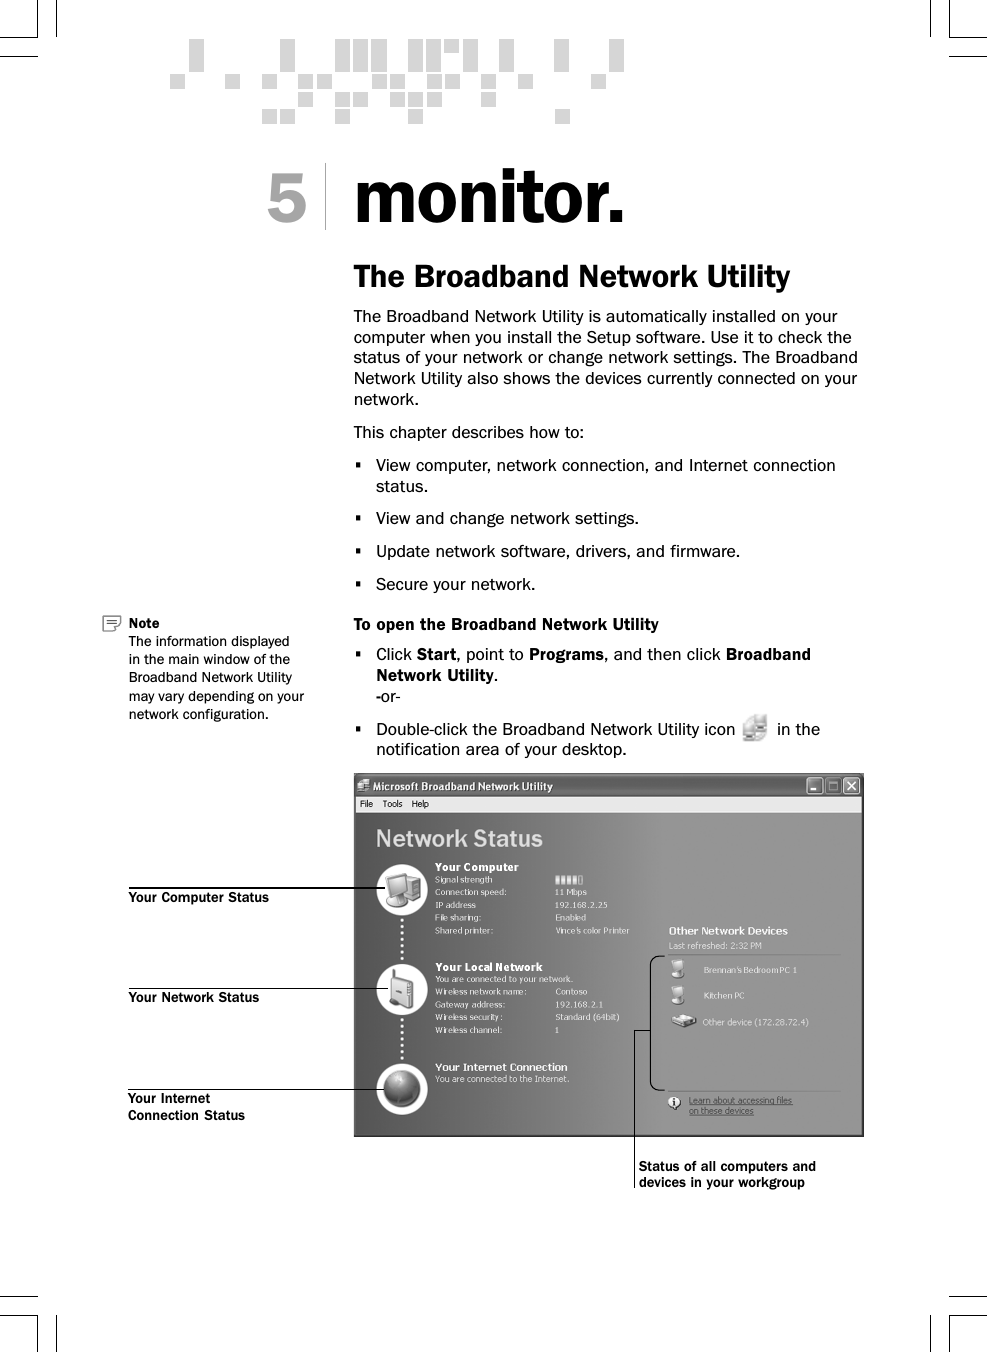 monitor.The Broadband Network UtilityThe Broadband Network Utility is automatically installed on yourcomputer when you install the Setup software. Use it to check thestatus of your network or change network settings. The BroadbandNetwork Utility also shows the devices currently connected on yournetwork.This chapter describes how to:•View computer, network connection, and Internet connectionstatus.•View and change network settings.•Update network software, drivers, and firmware.•Secure your network.To open the Broadband Network Utility•Click Start, point to Programs, and then click BroadbandNetwork Utility.-or-•Double-click the Broadband Network Utility icon   in thenotification area of your desktop.5Note   The information displayedin the main window of theBroadband Network Utilitymay vary depending on yournetwork configuration.Your InternetConnection StatusYour Network StatusYour Computer StatusStatus of all computers anddevices in your workgroup